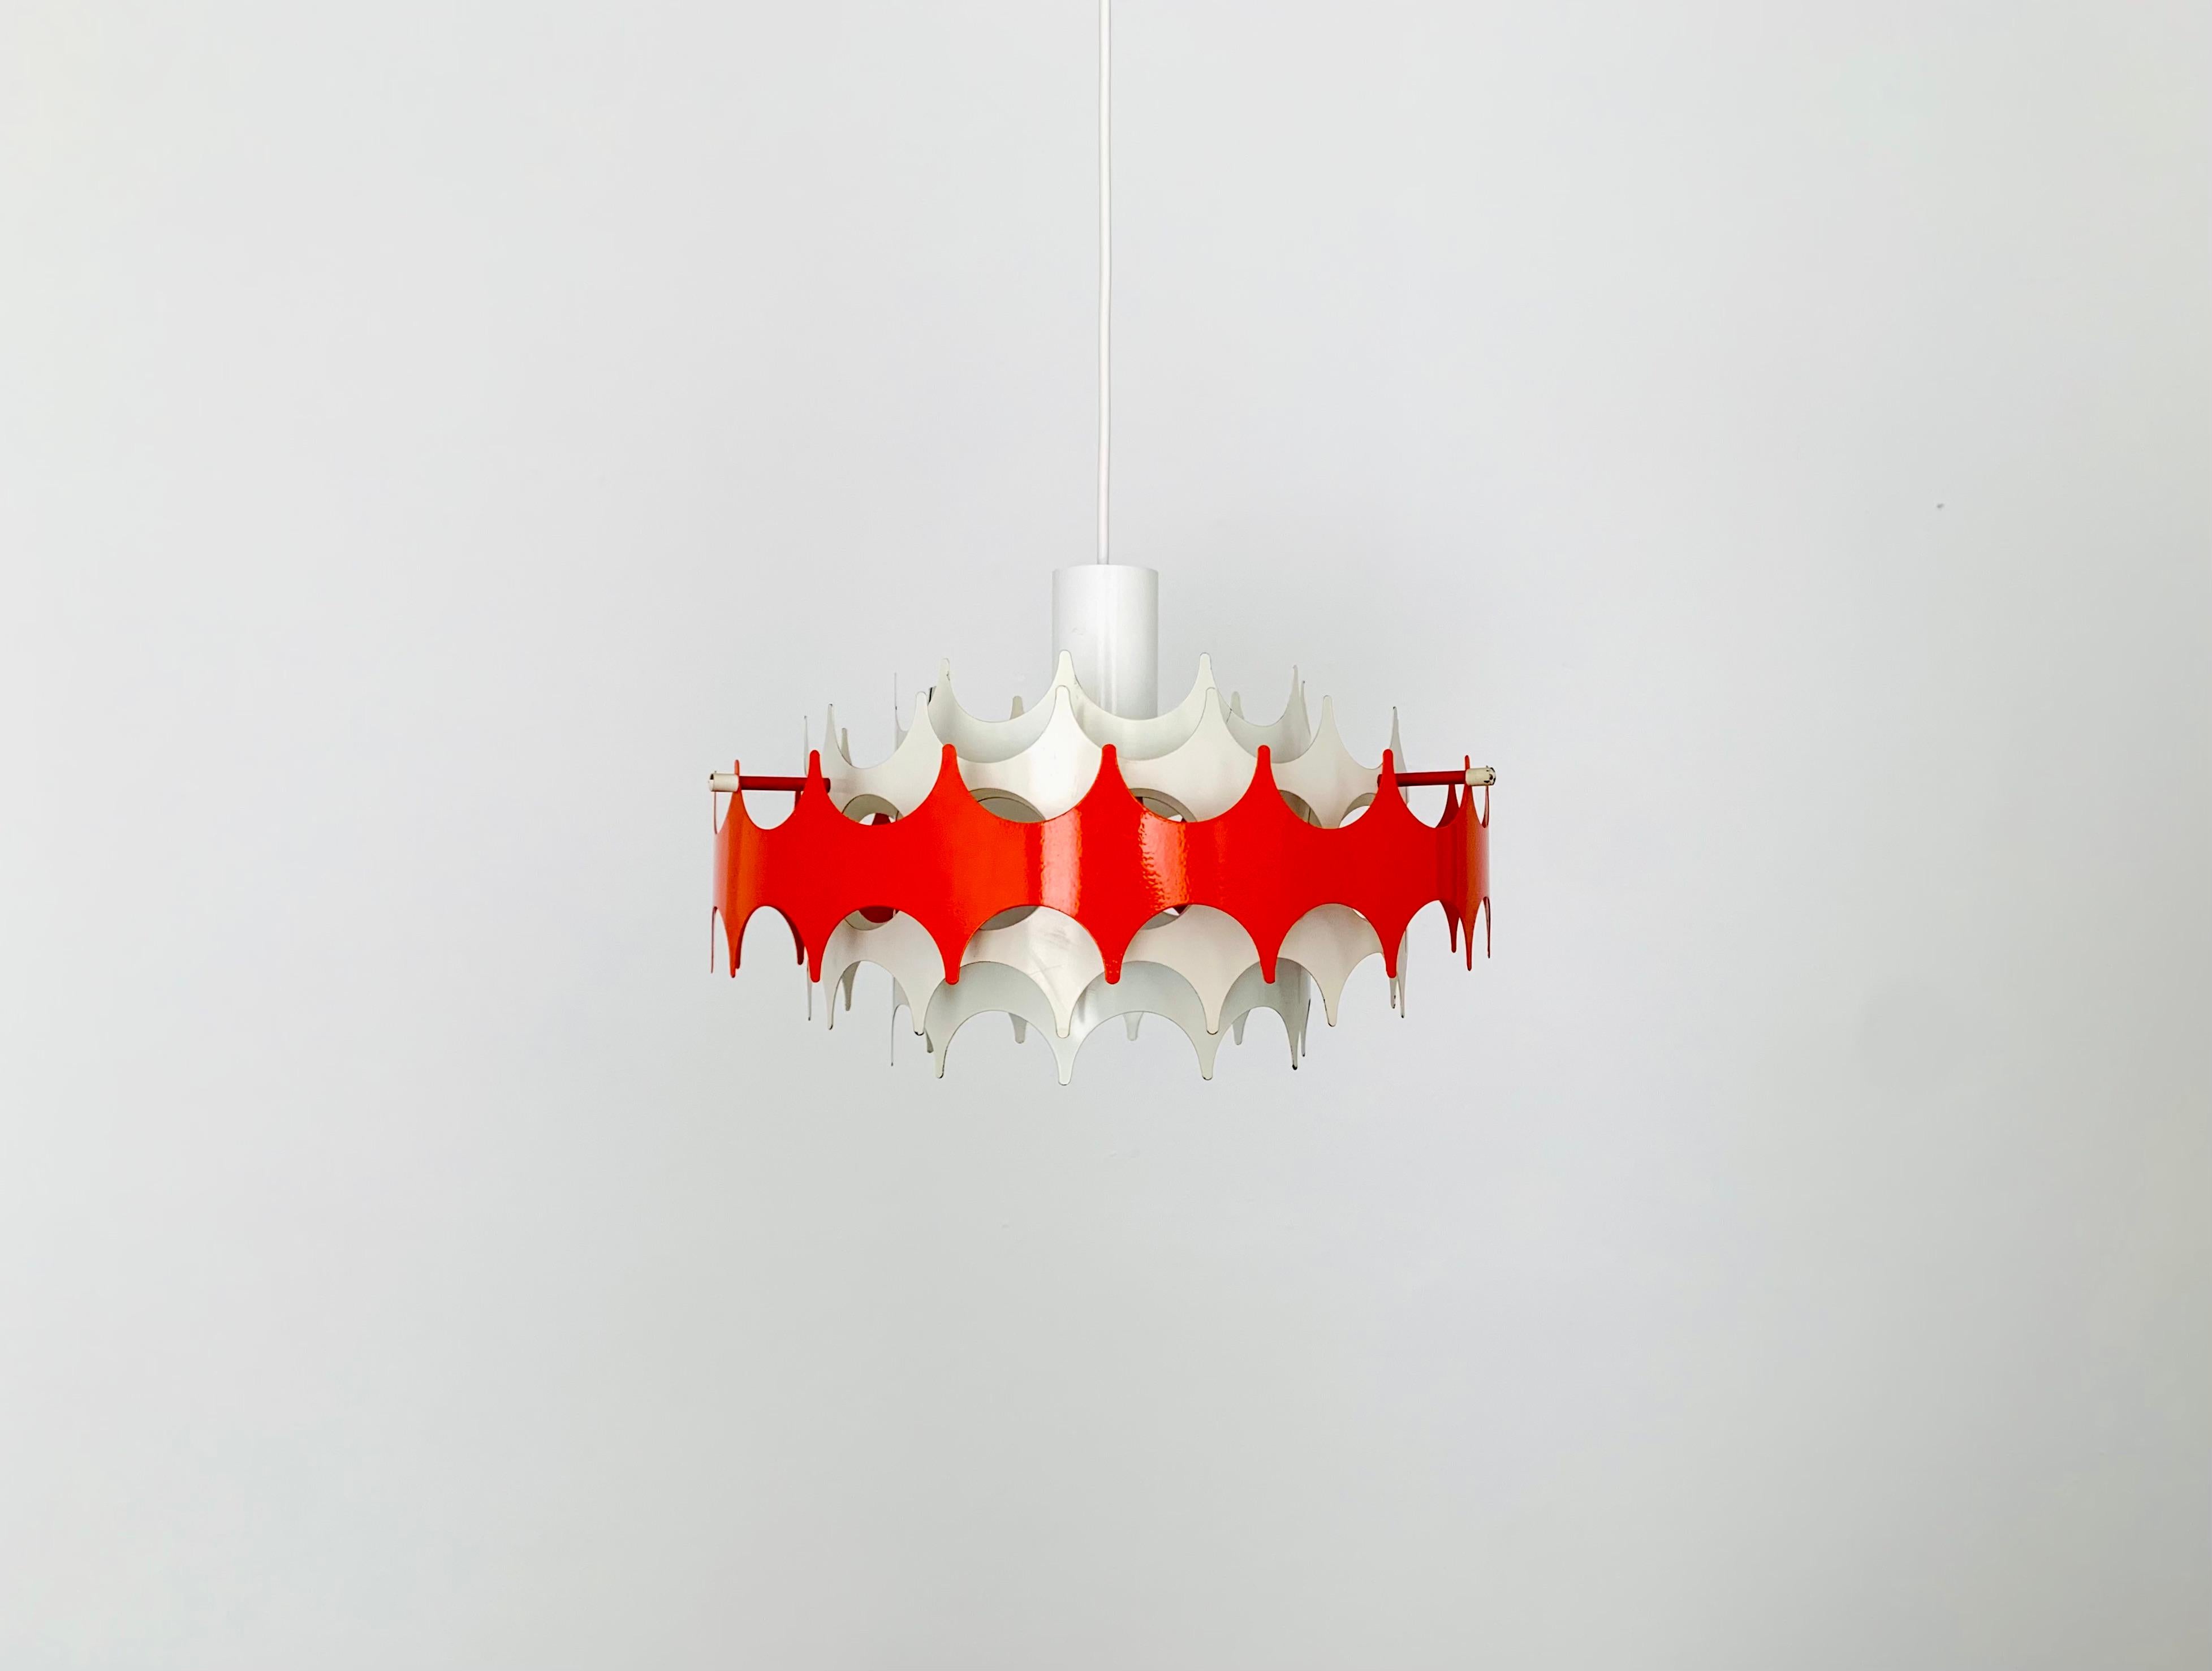 Beautiful pendant lamp from the 1960s.
Extraordinarily high-quality workmanship with a fantastic charisma.
The design creates a spectacular play of light in the room.

Manufacturer: Doria

Condition:

Very good vintage condition with slight signs of